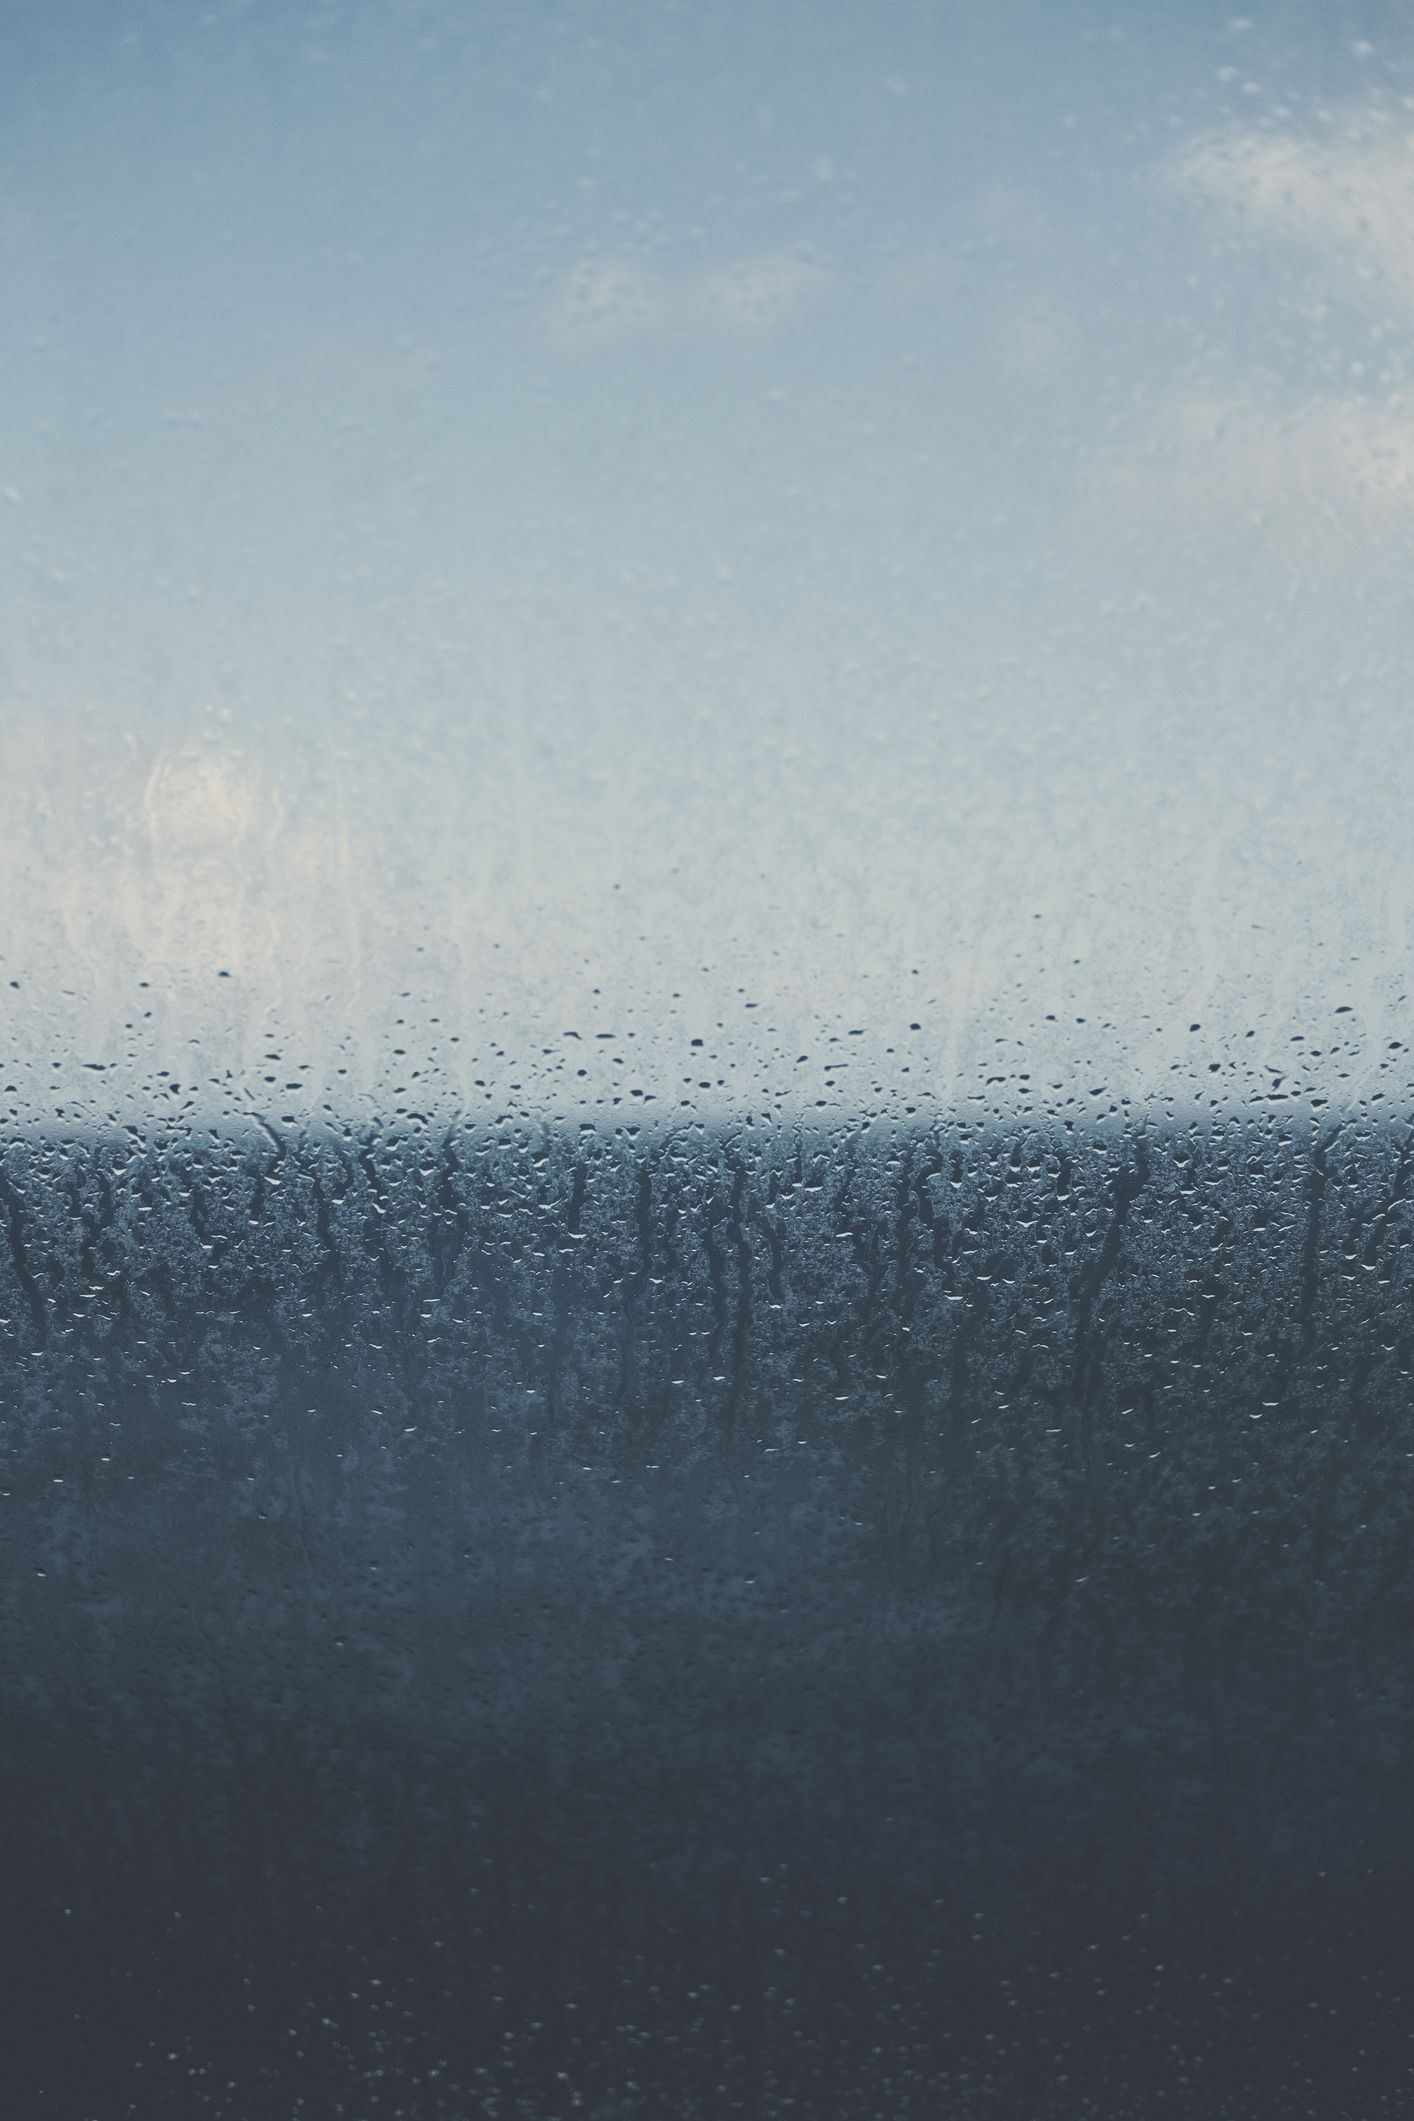 Raindrops and condensation on window